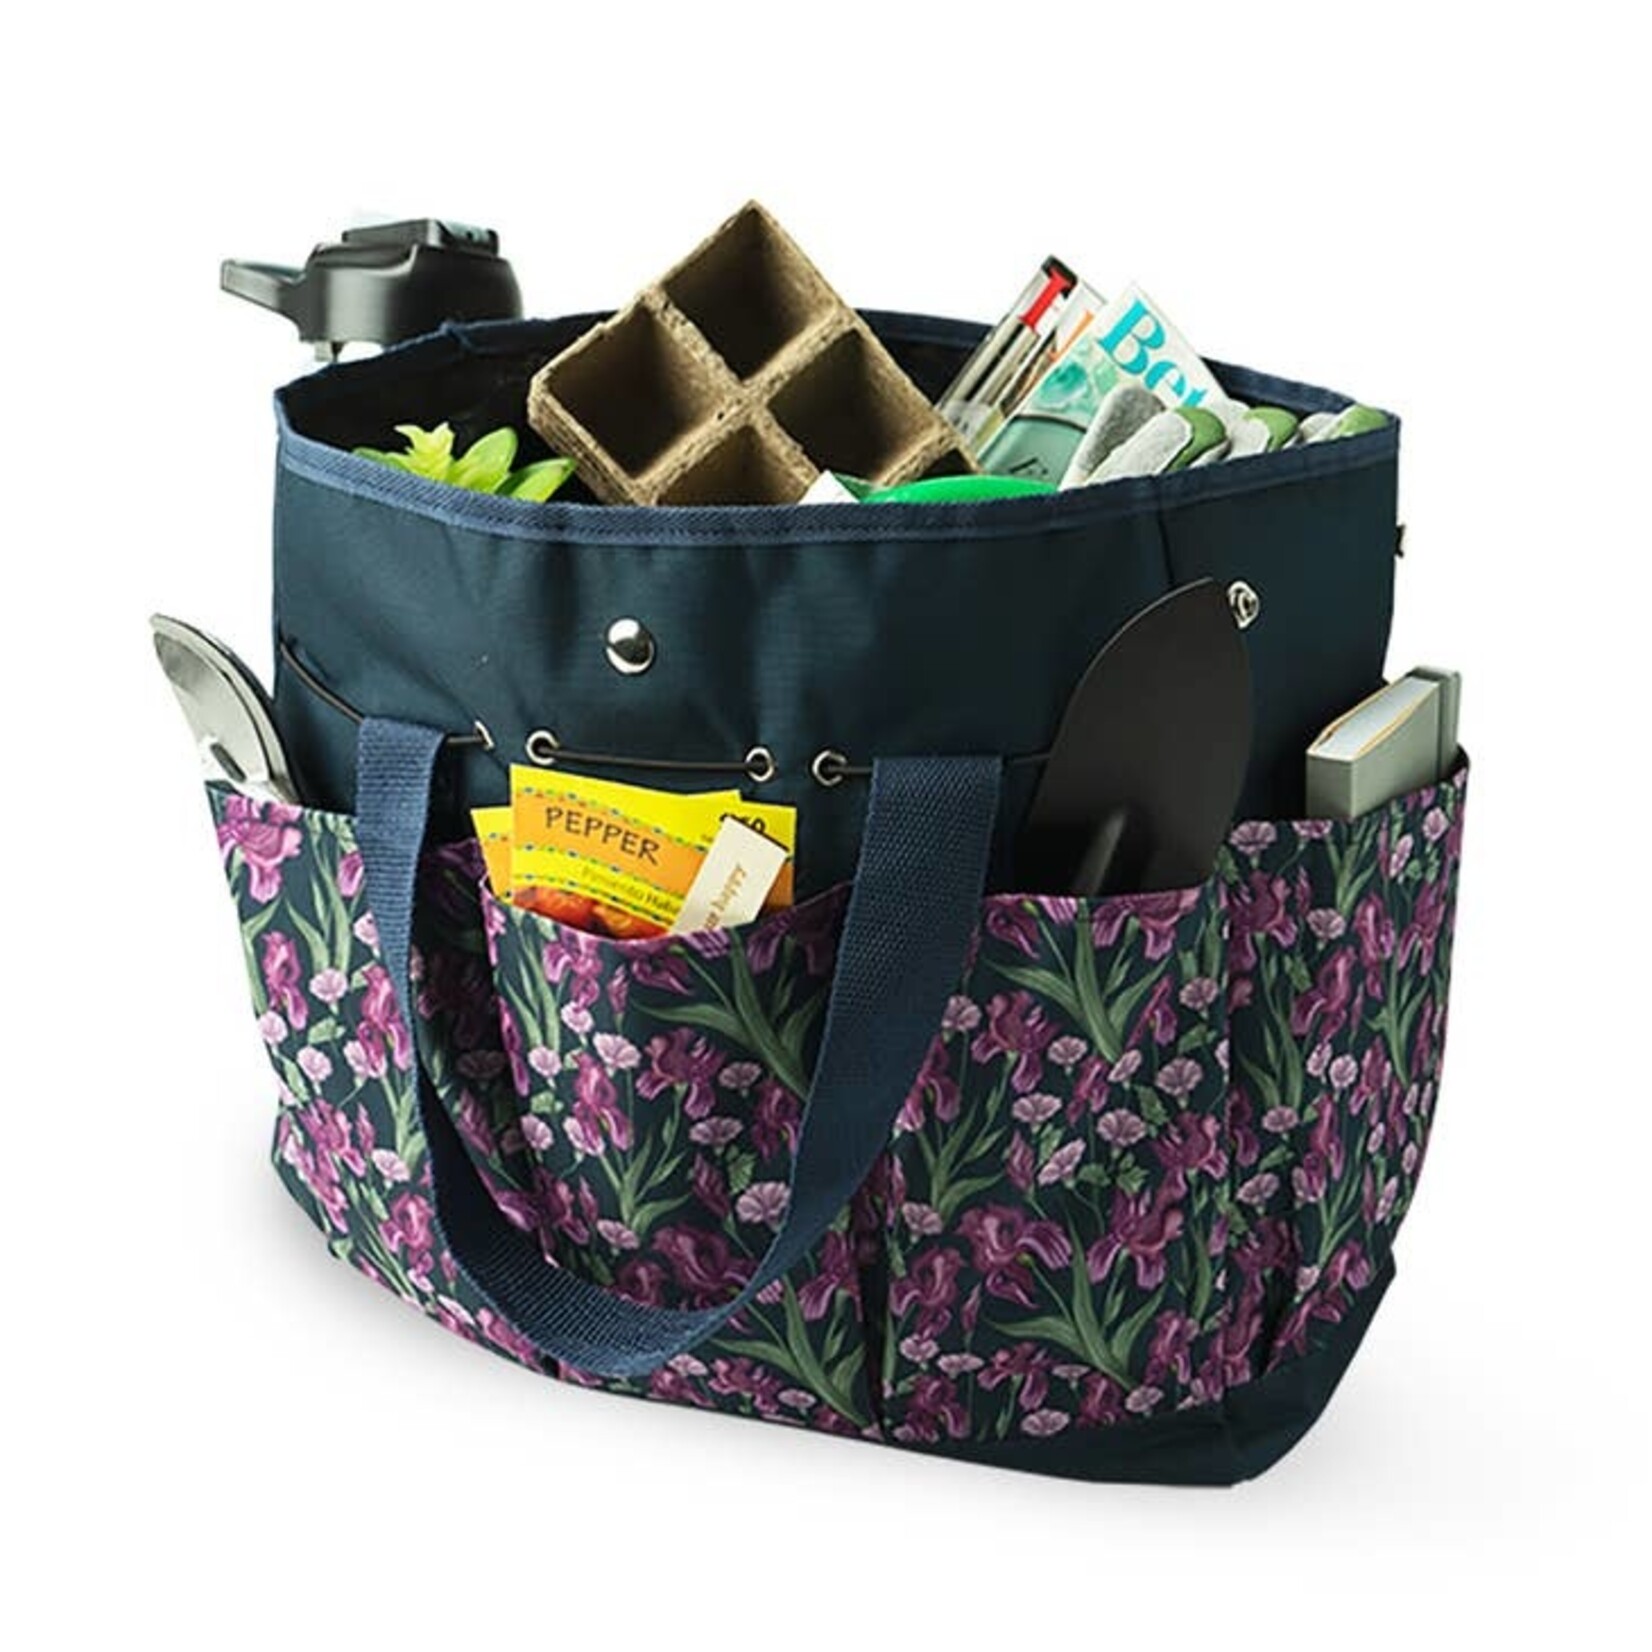 DMerch Seed & Sprout Gardening Tote Bag